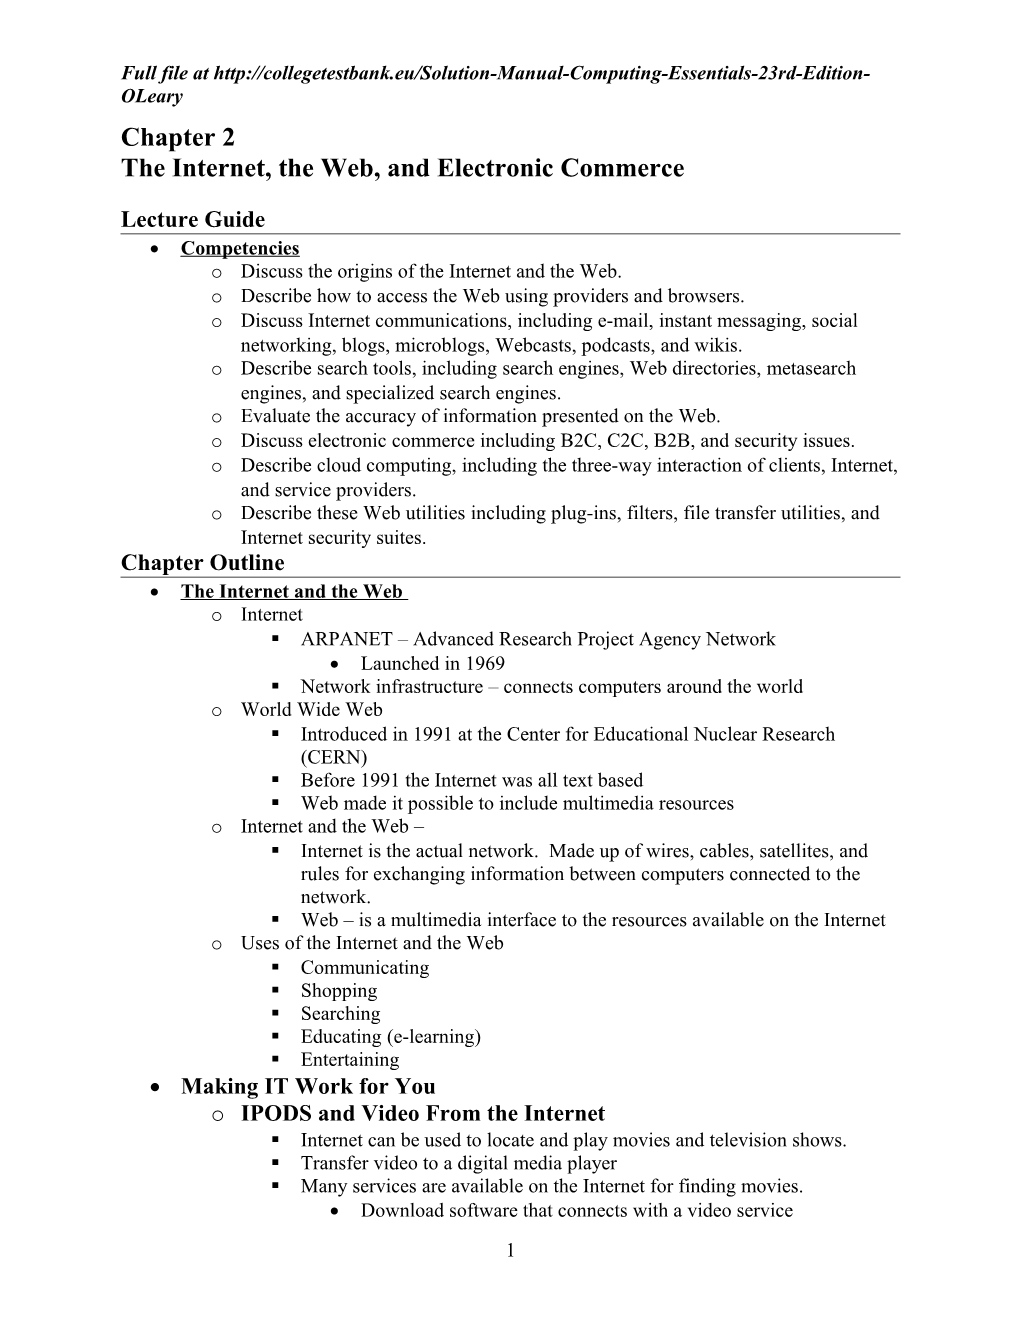 The Internet, the Web, and Electronic Commerce